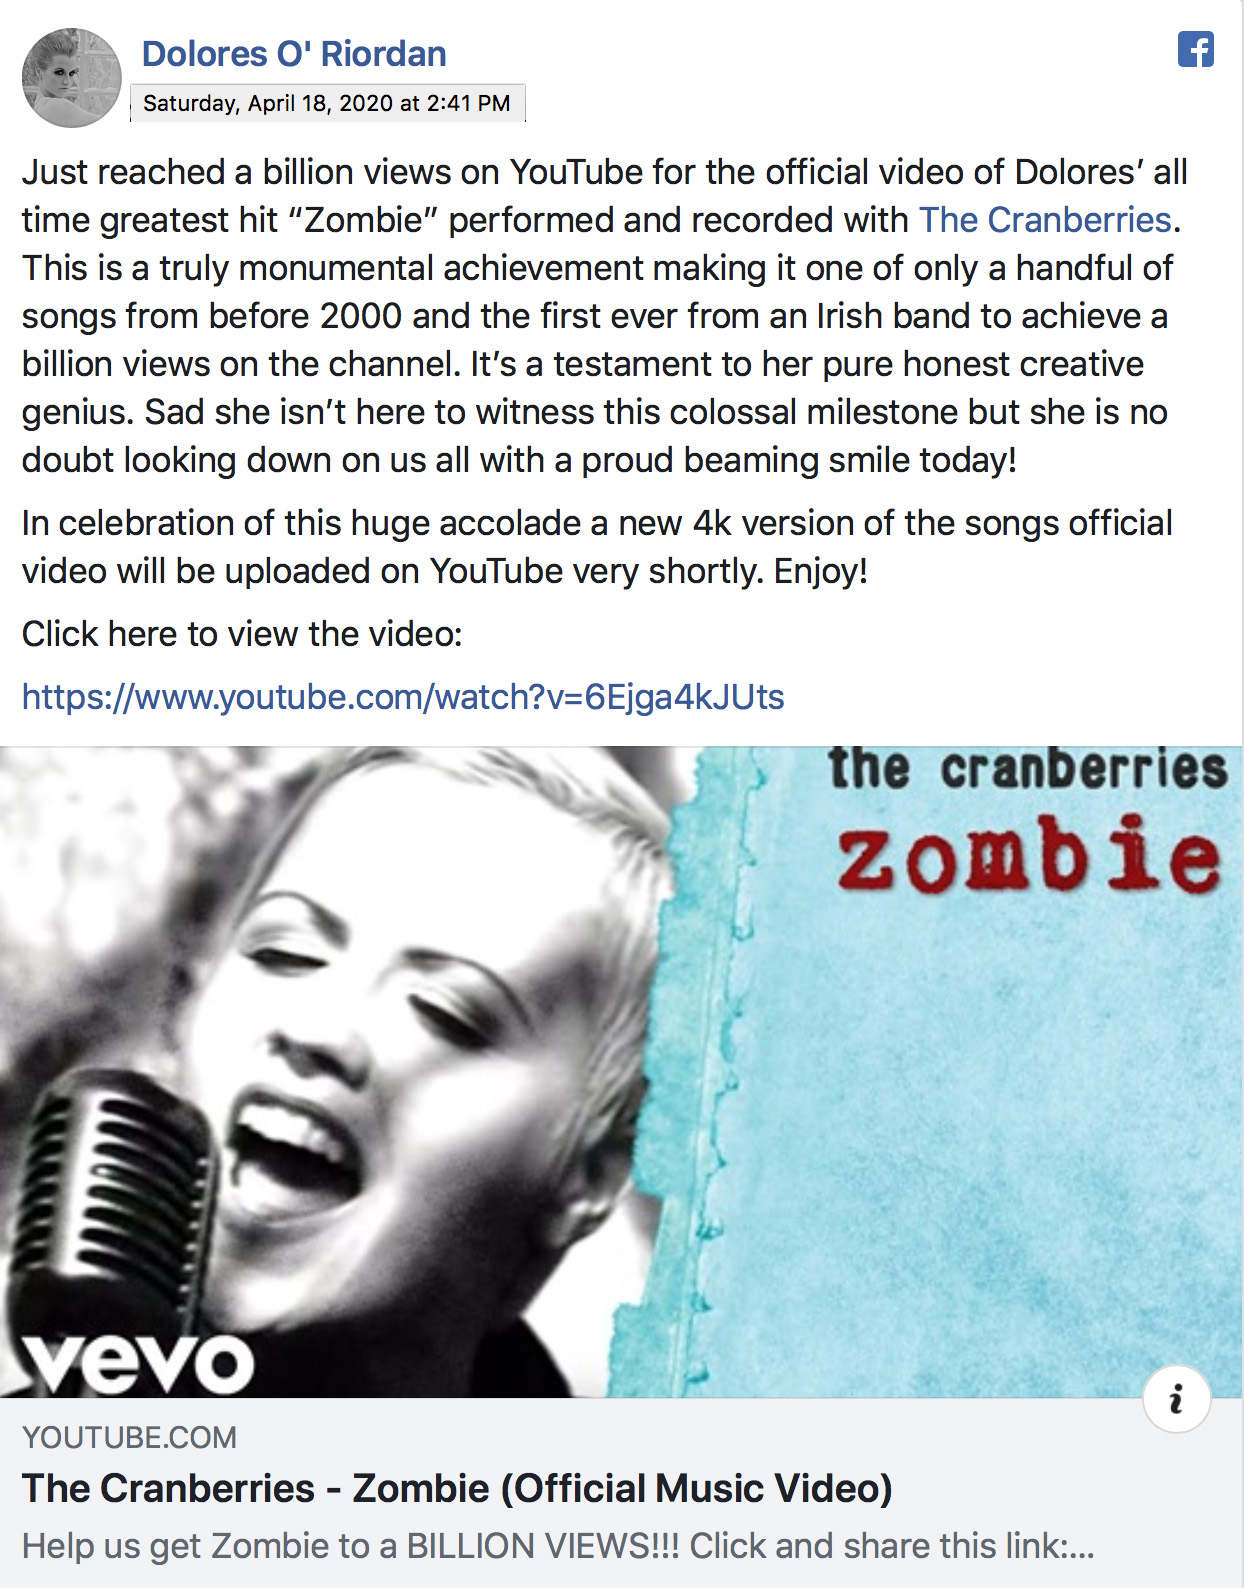 The Cranberries - Zombie (Official Music Video) 